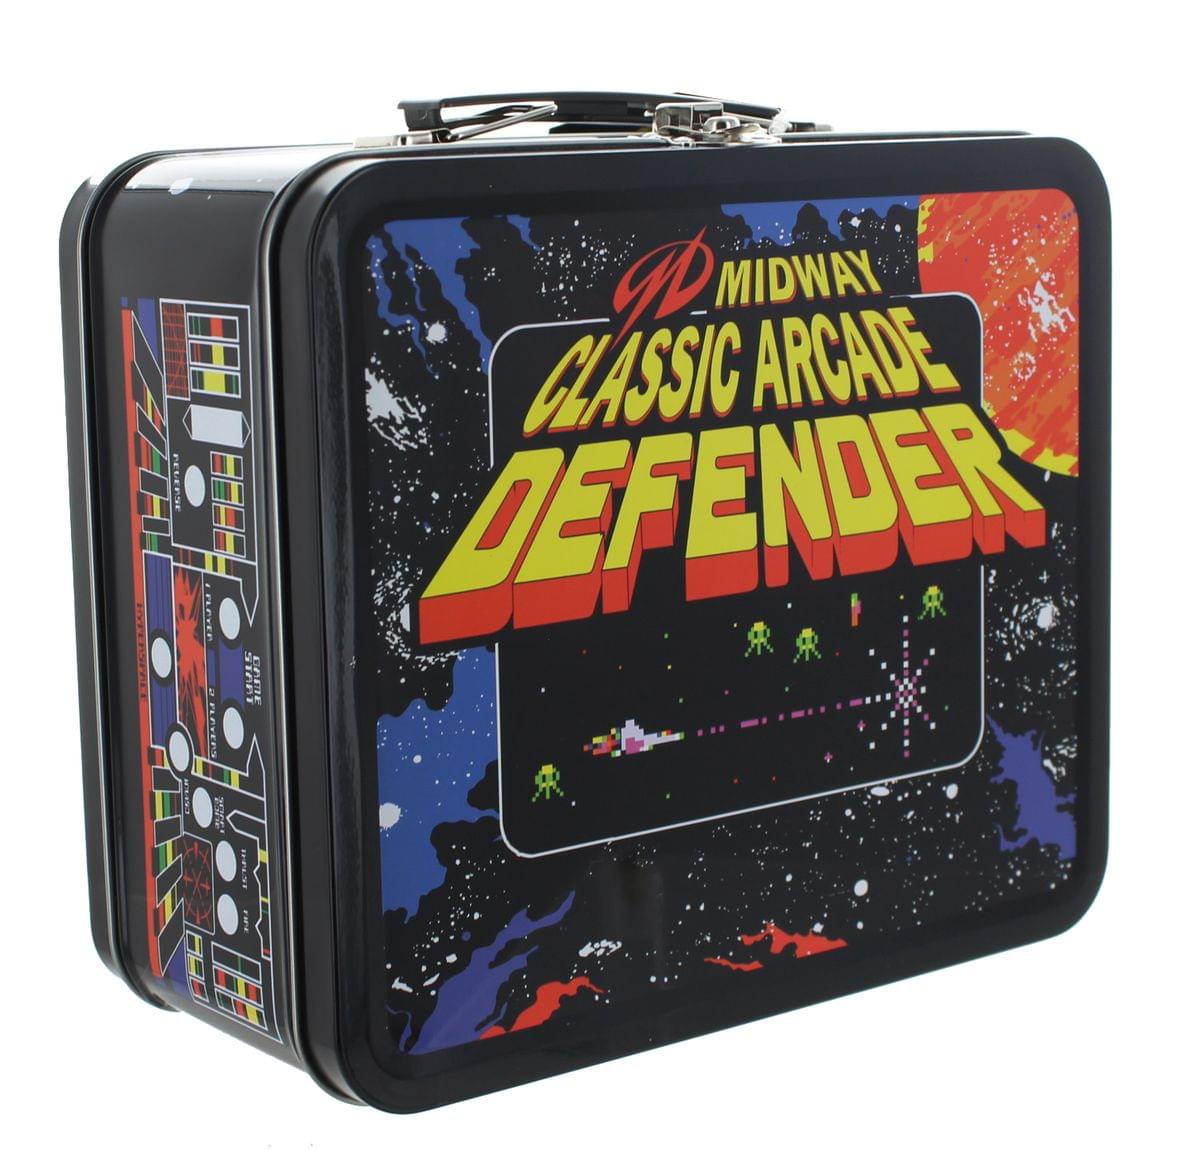 Midway Classic Arcade Tin Lunch Box, Defender